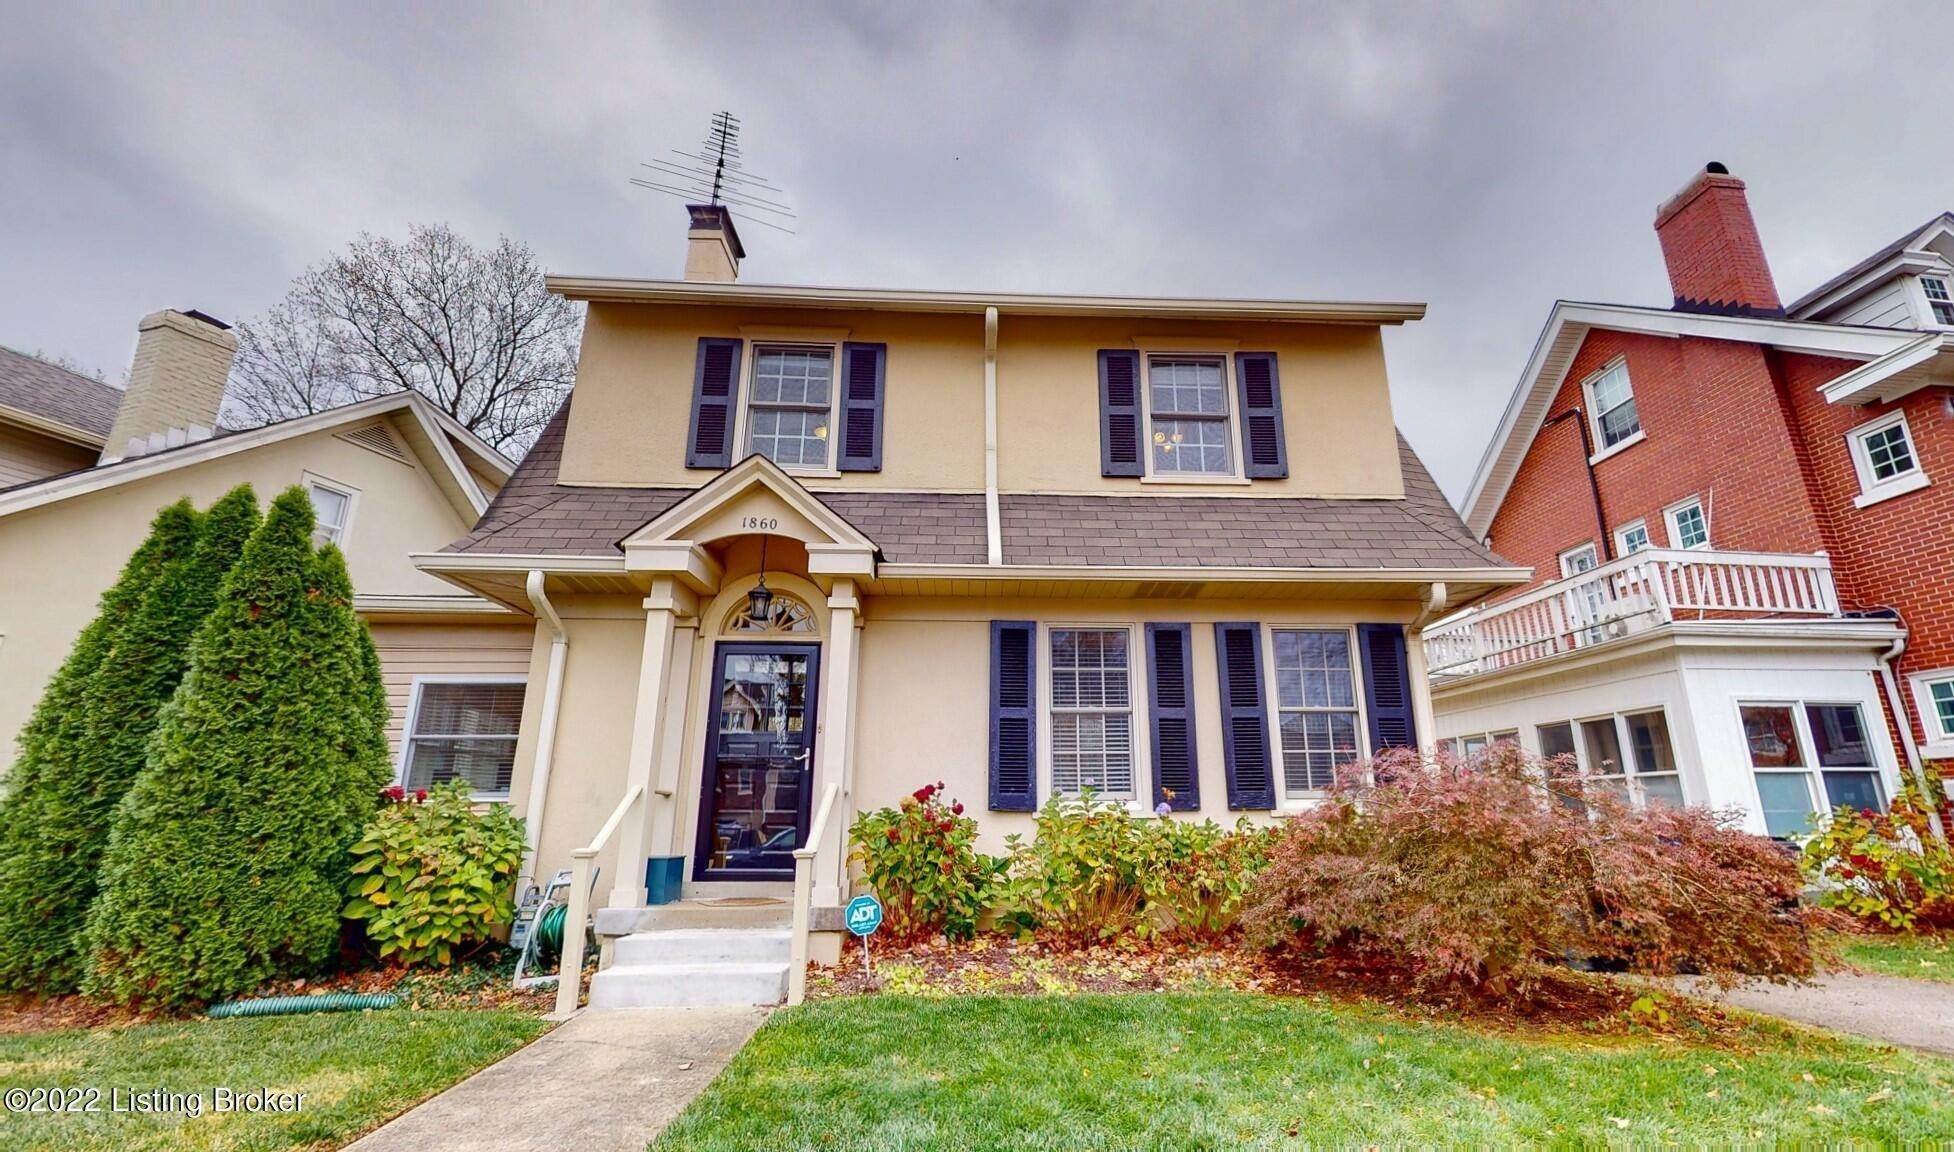 31. Single Family at Louisville, KY 40205